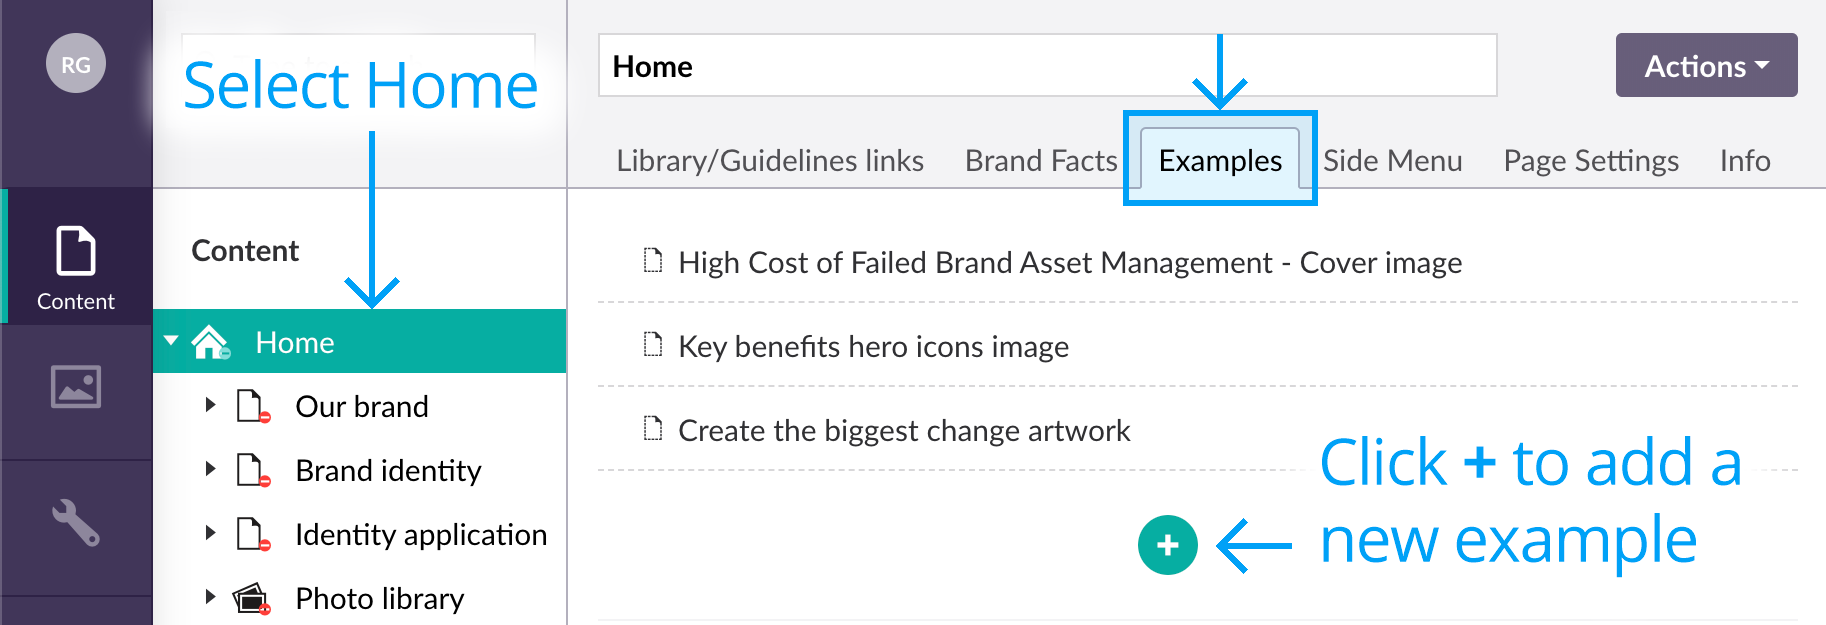 Content section - Add new example panel